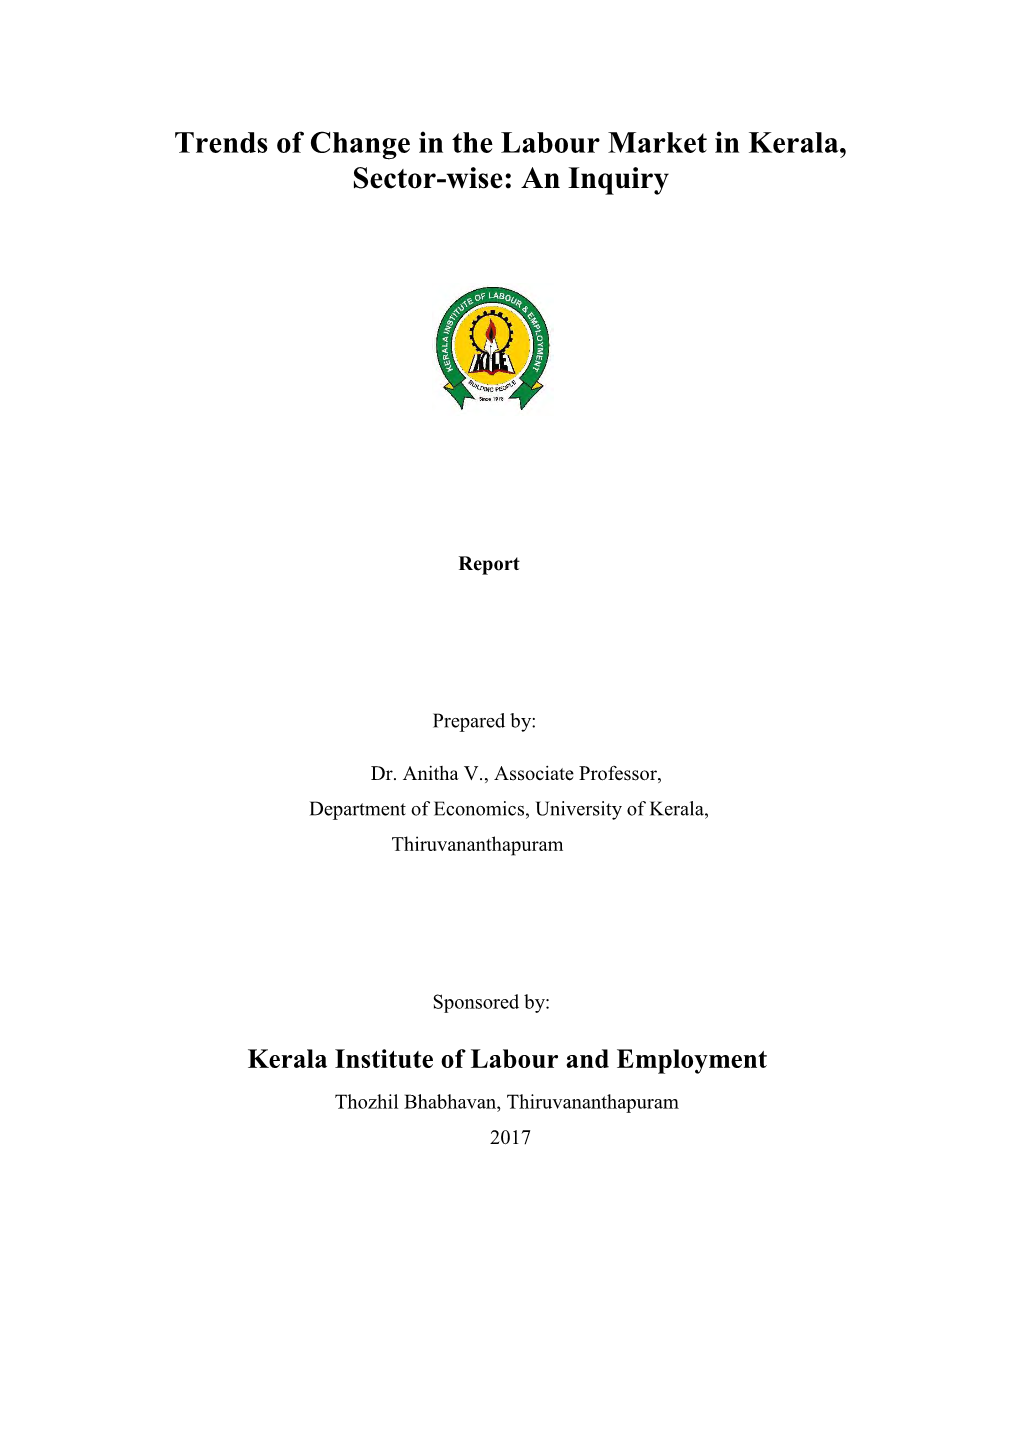 Trends of Change in the Labour Market in Kerala, Sector-Wise: an Inquiry